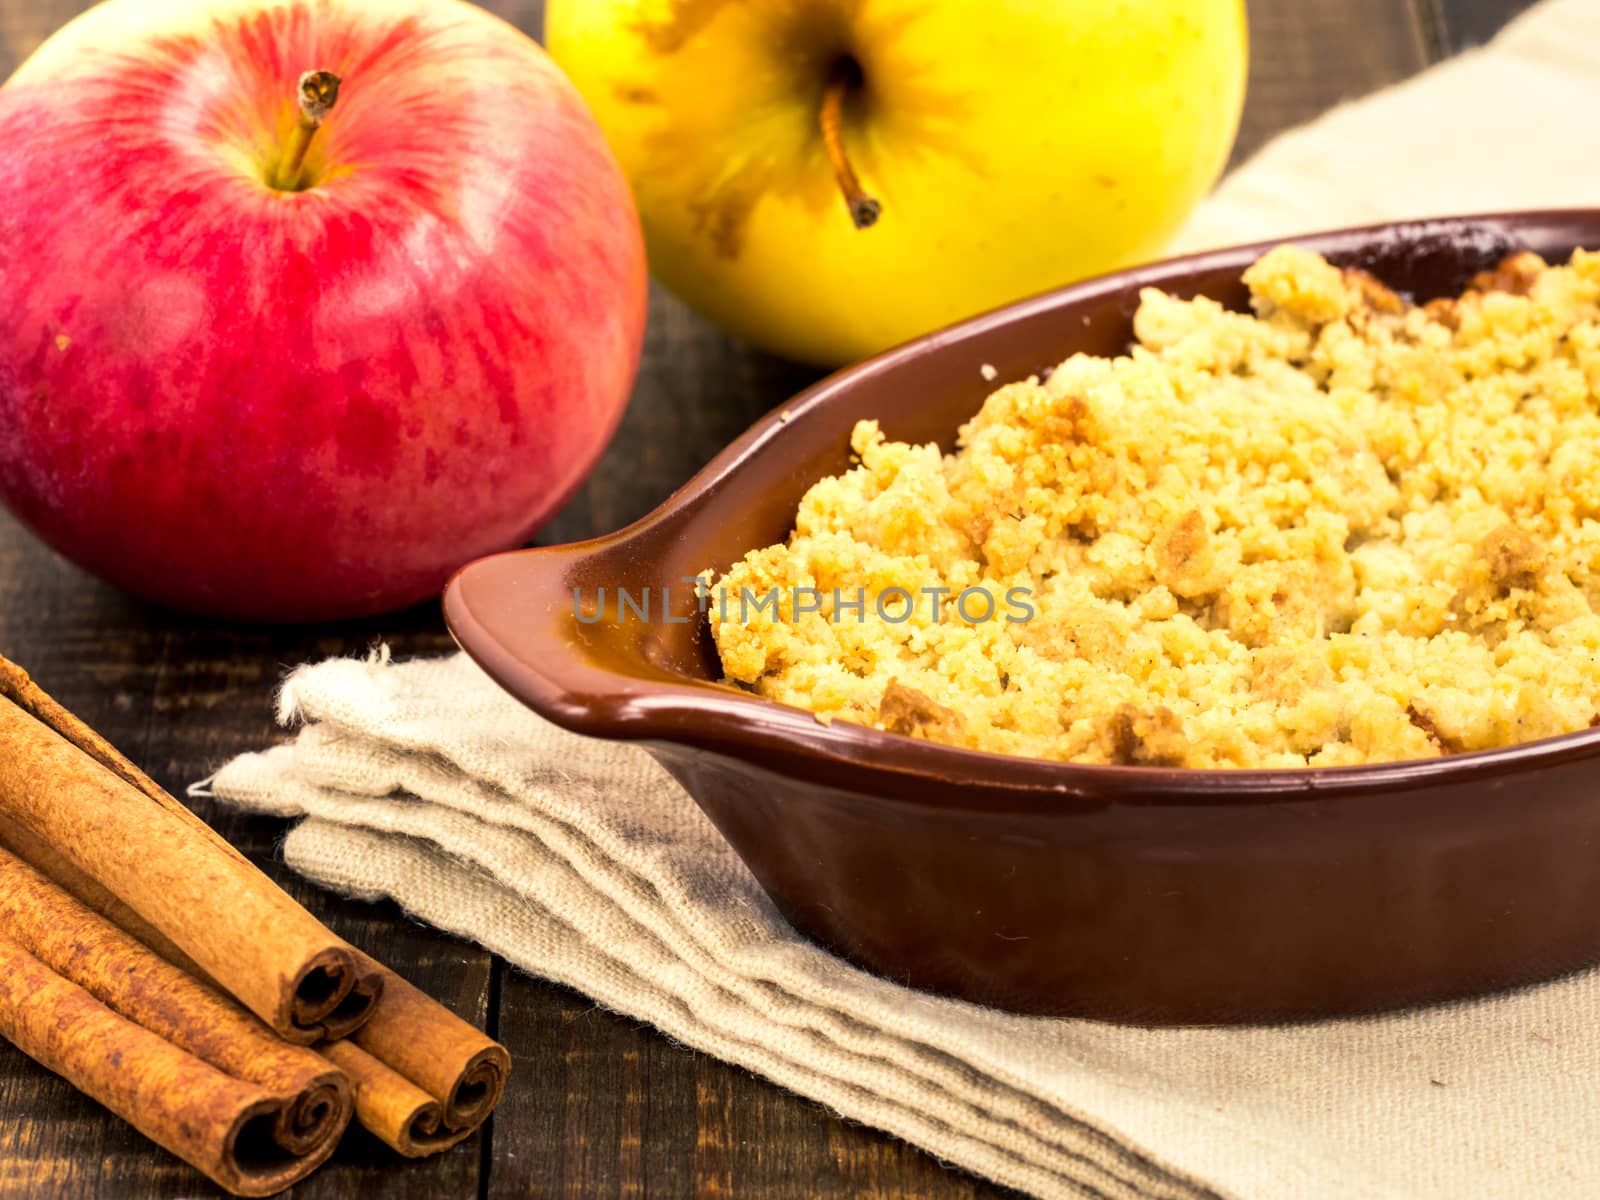 Homemade apple cramble cake with fresh apples and cinnamon sticks on rustic dark wooden background